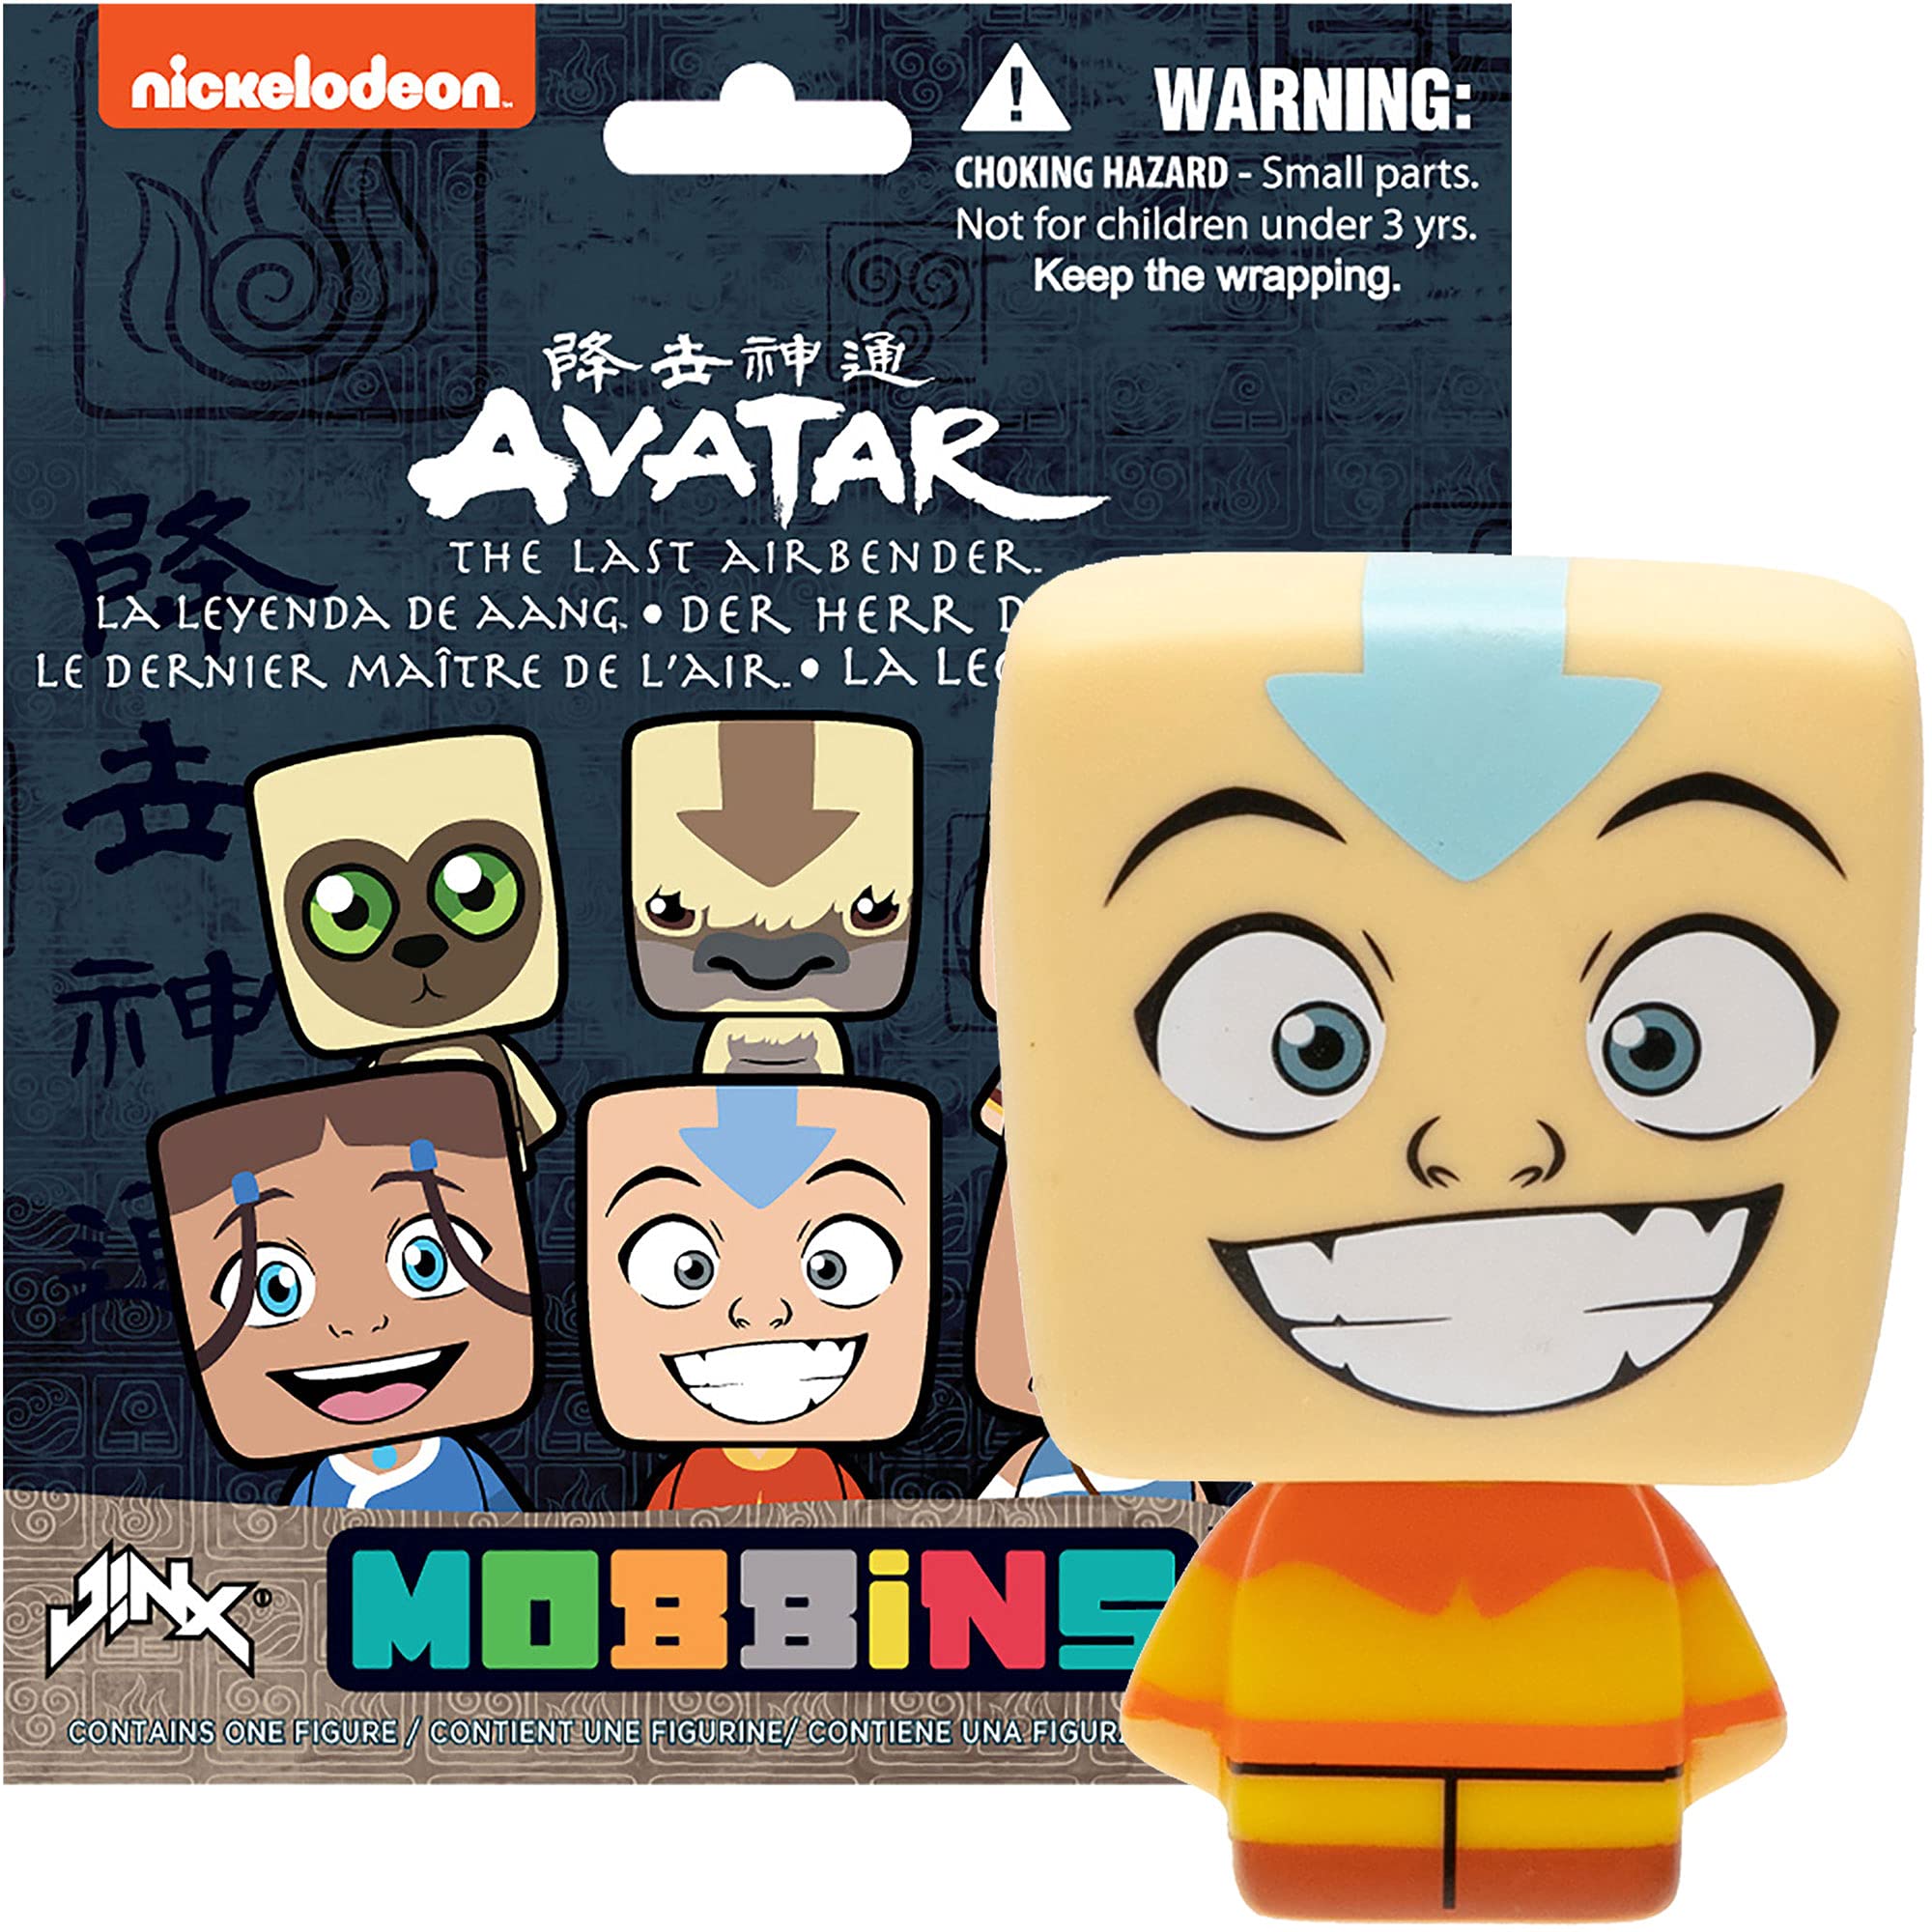 JINX Avatar: The Last Airbender Mobbins Toy Blind Pack (One Mystery Figure), 2-in Vinyl Figure from Nickelodeon TV Series for Fans Ages 3+